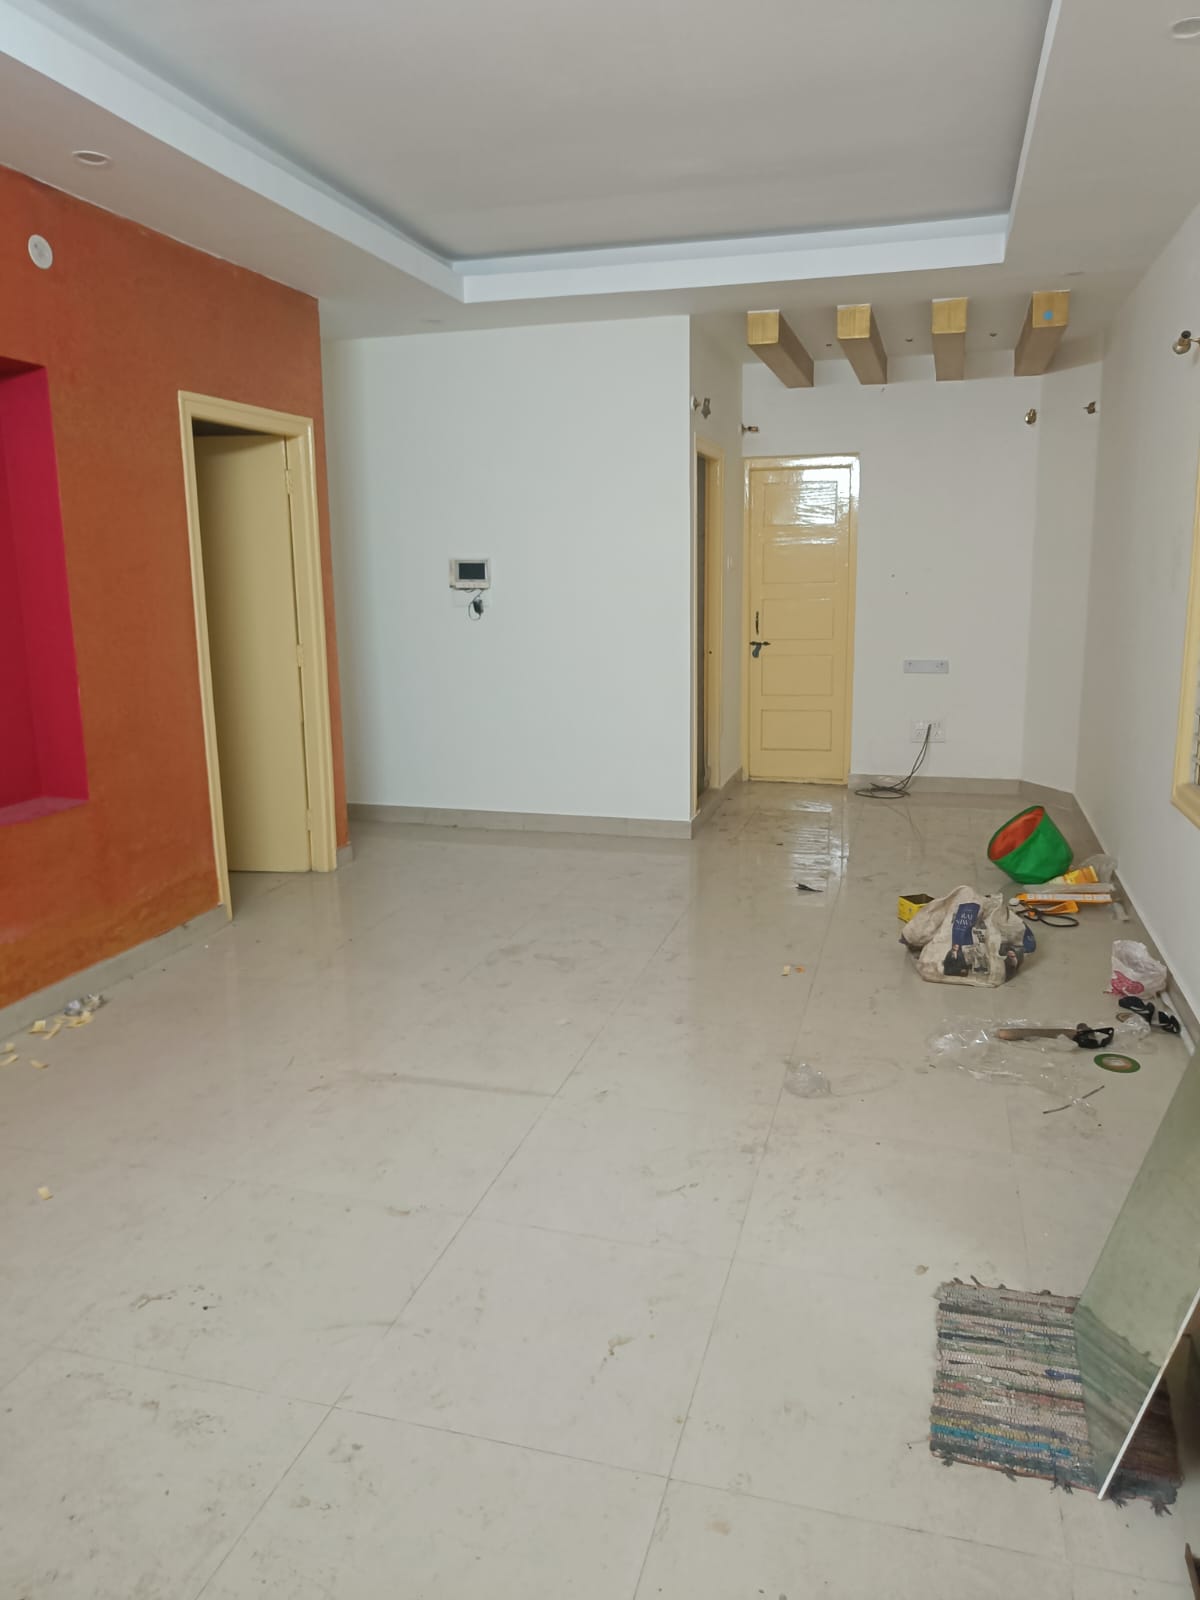 3 BHK Residential Apartment for Lease Only at JAML2 - 2281 in Balepet